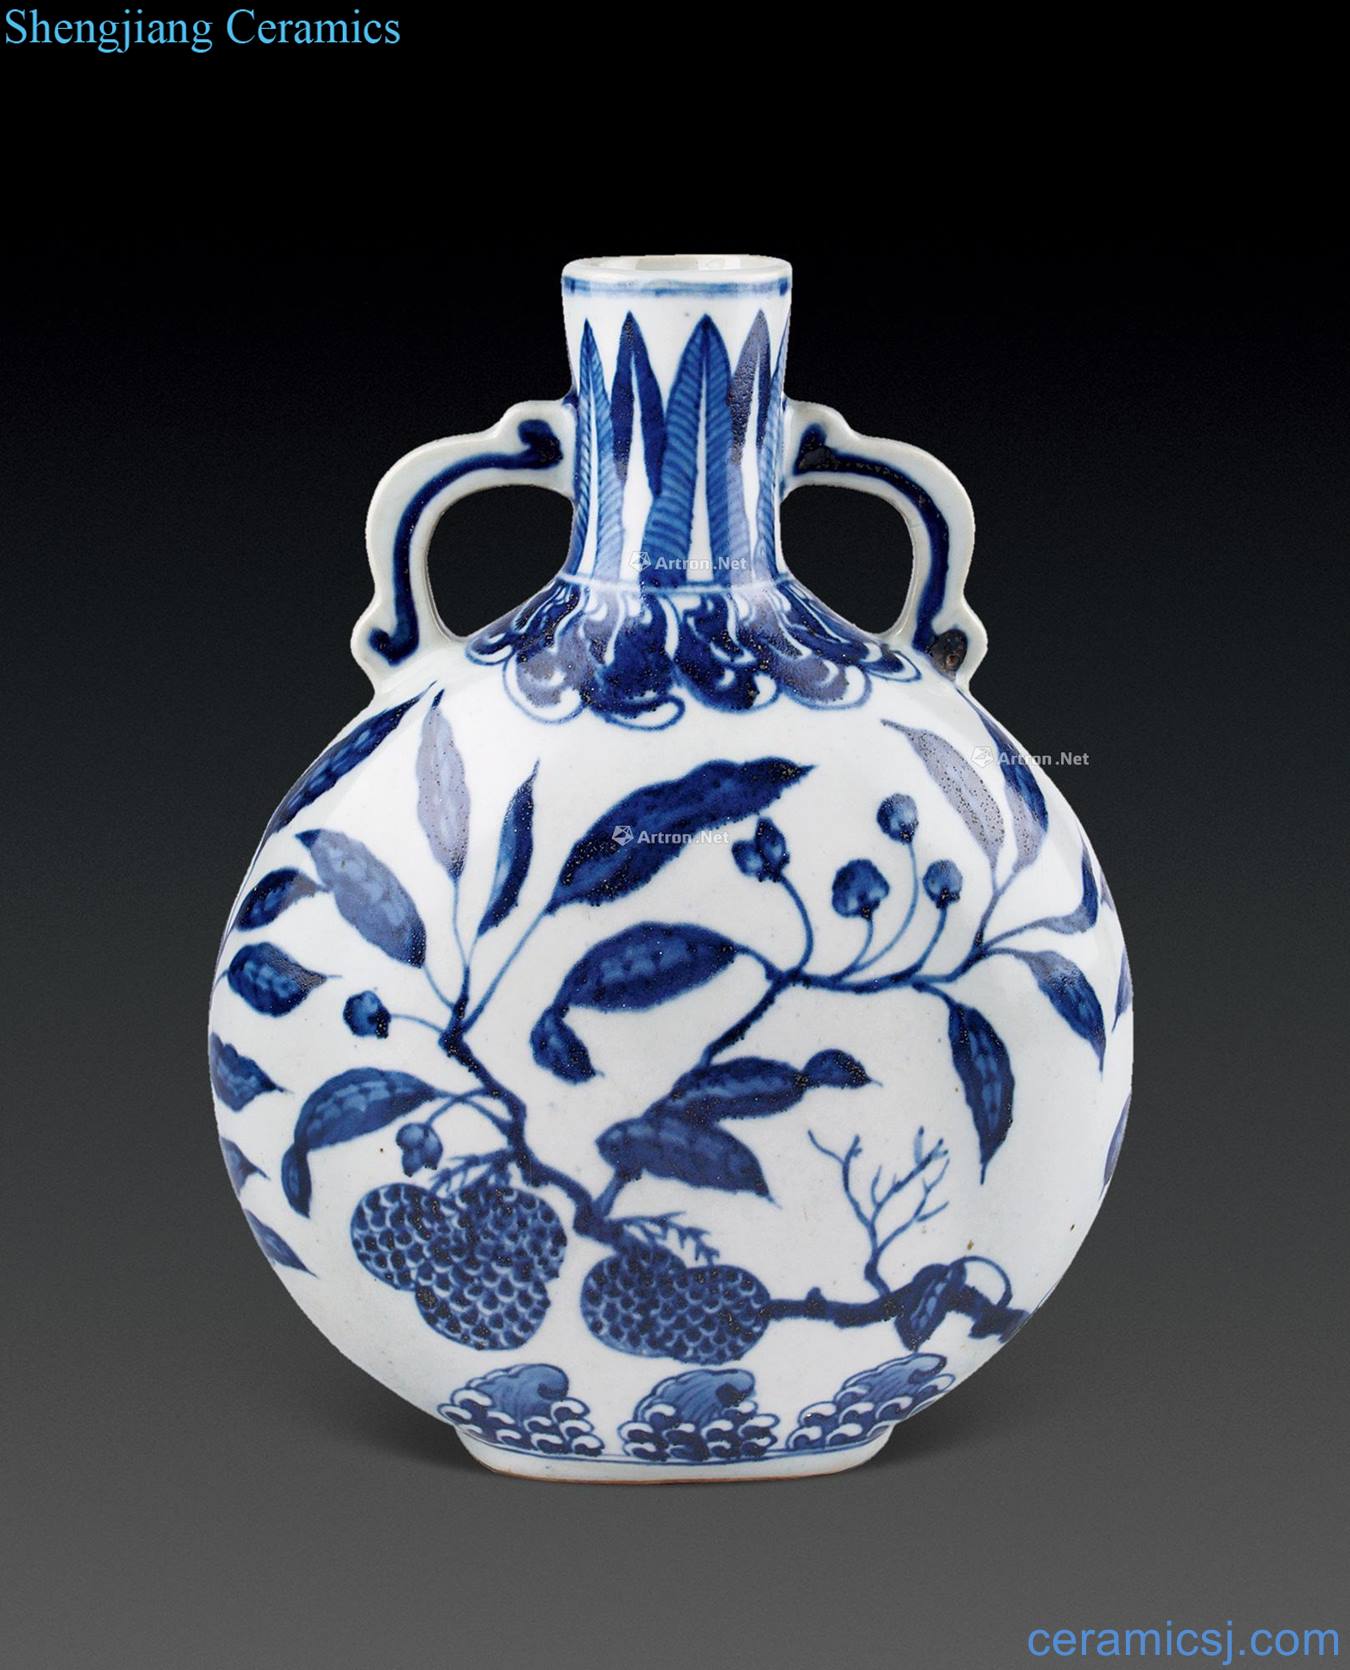 In the Ming dynasty Description of the early blue-and-white flower tattoos on bottle